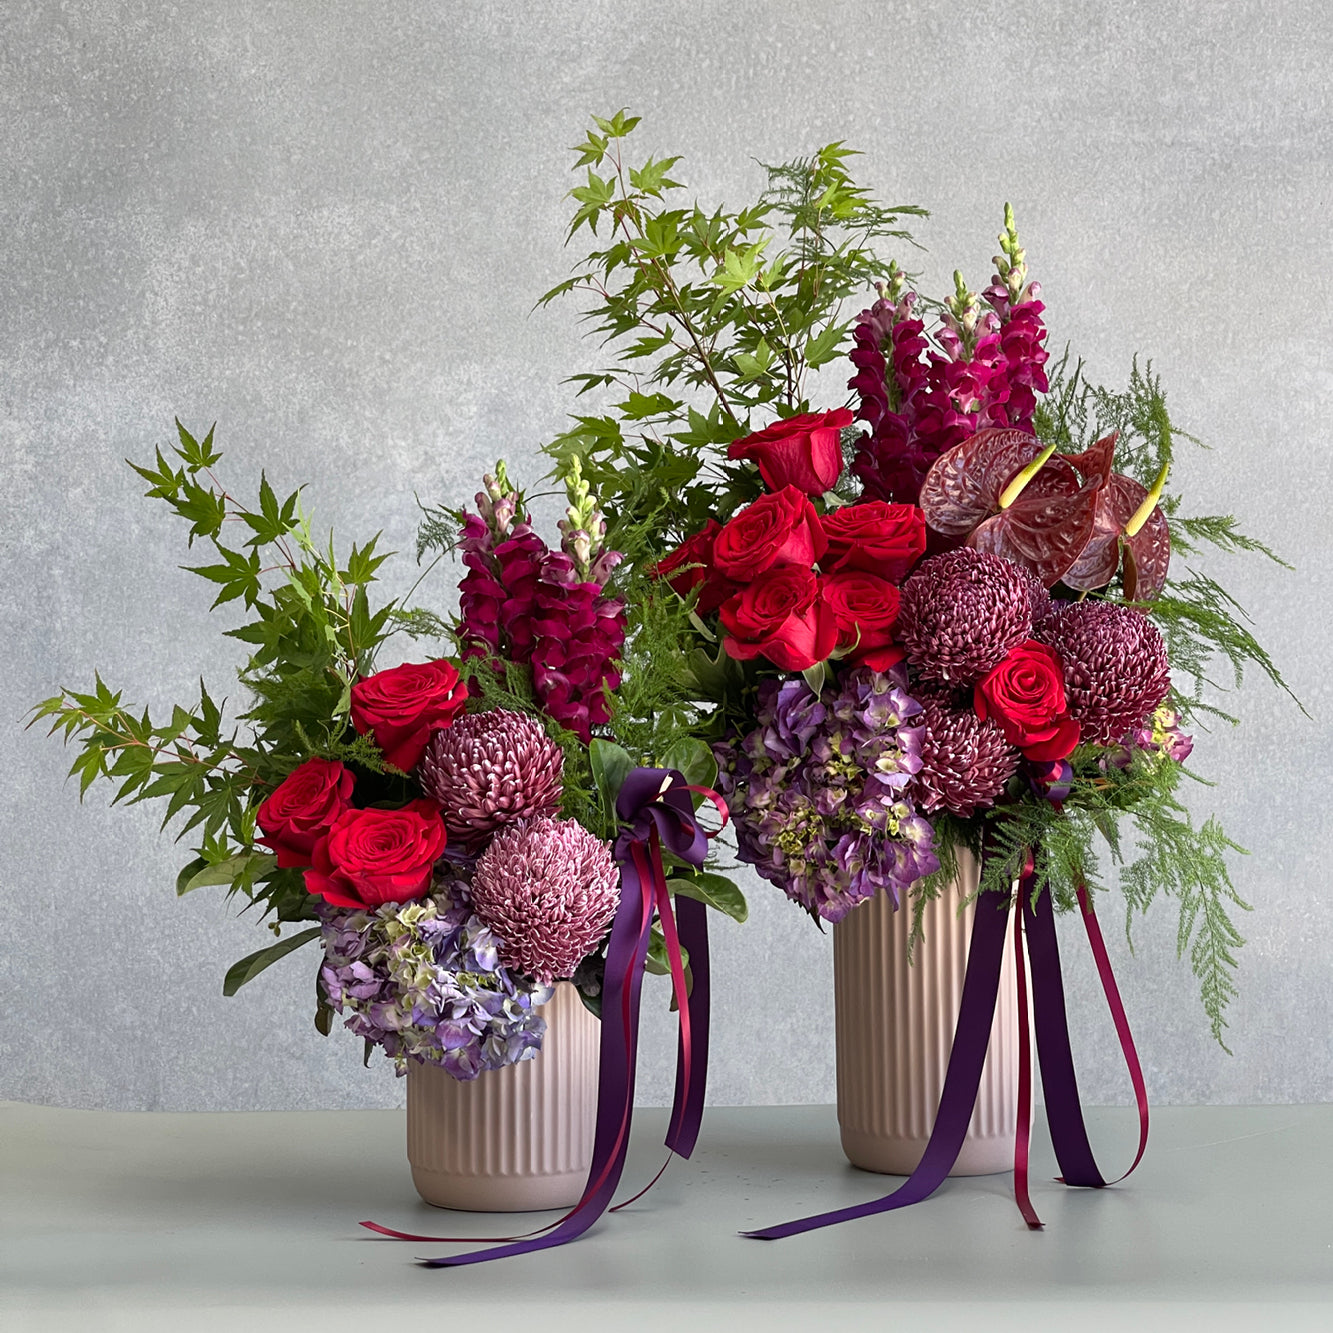 Send fresh flower arrangement within hours in Perth. Trusted florist with a wide variety of gorgeous flower arrangements and same day delivery